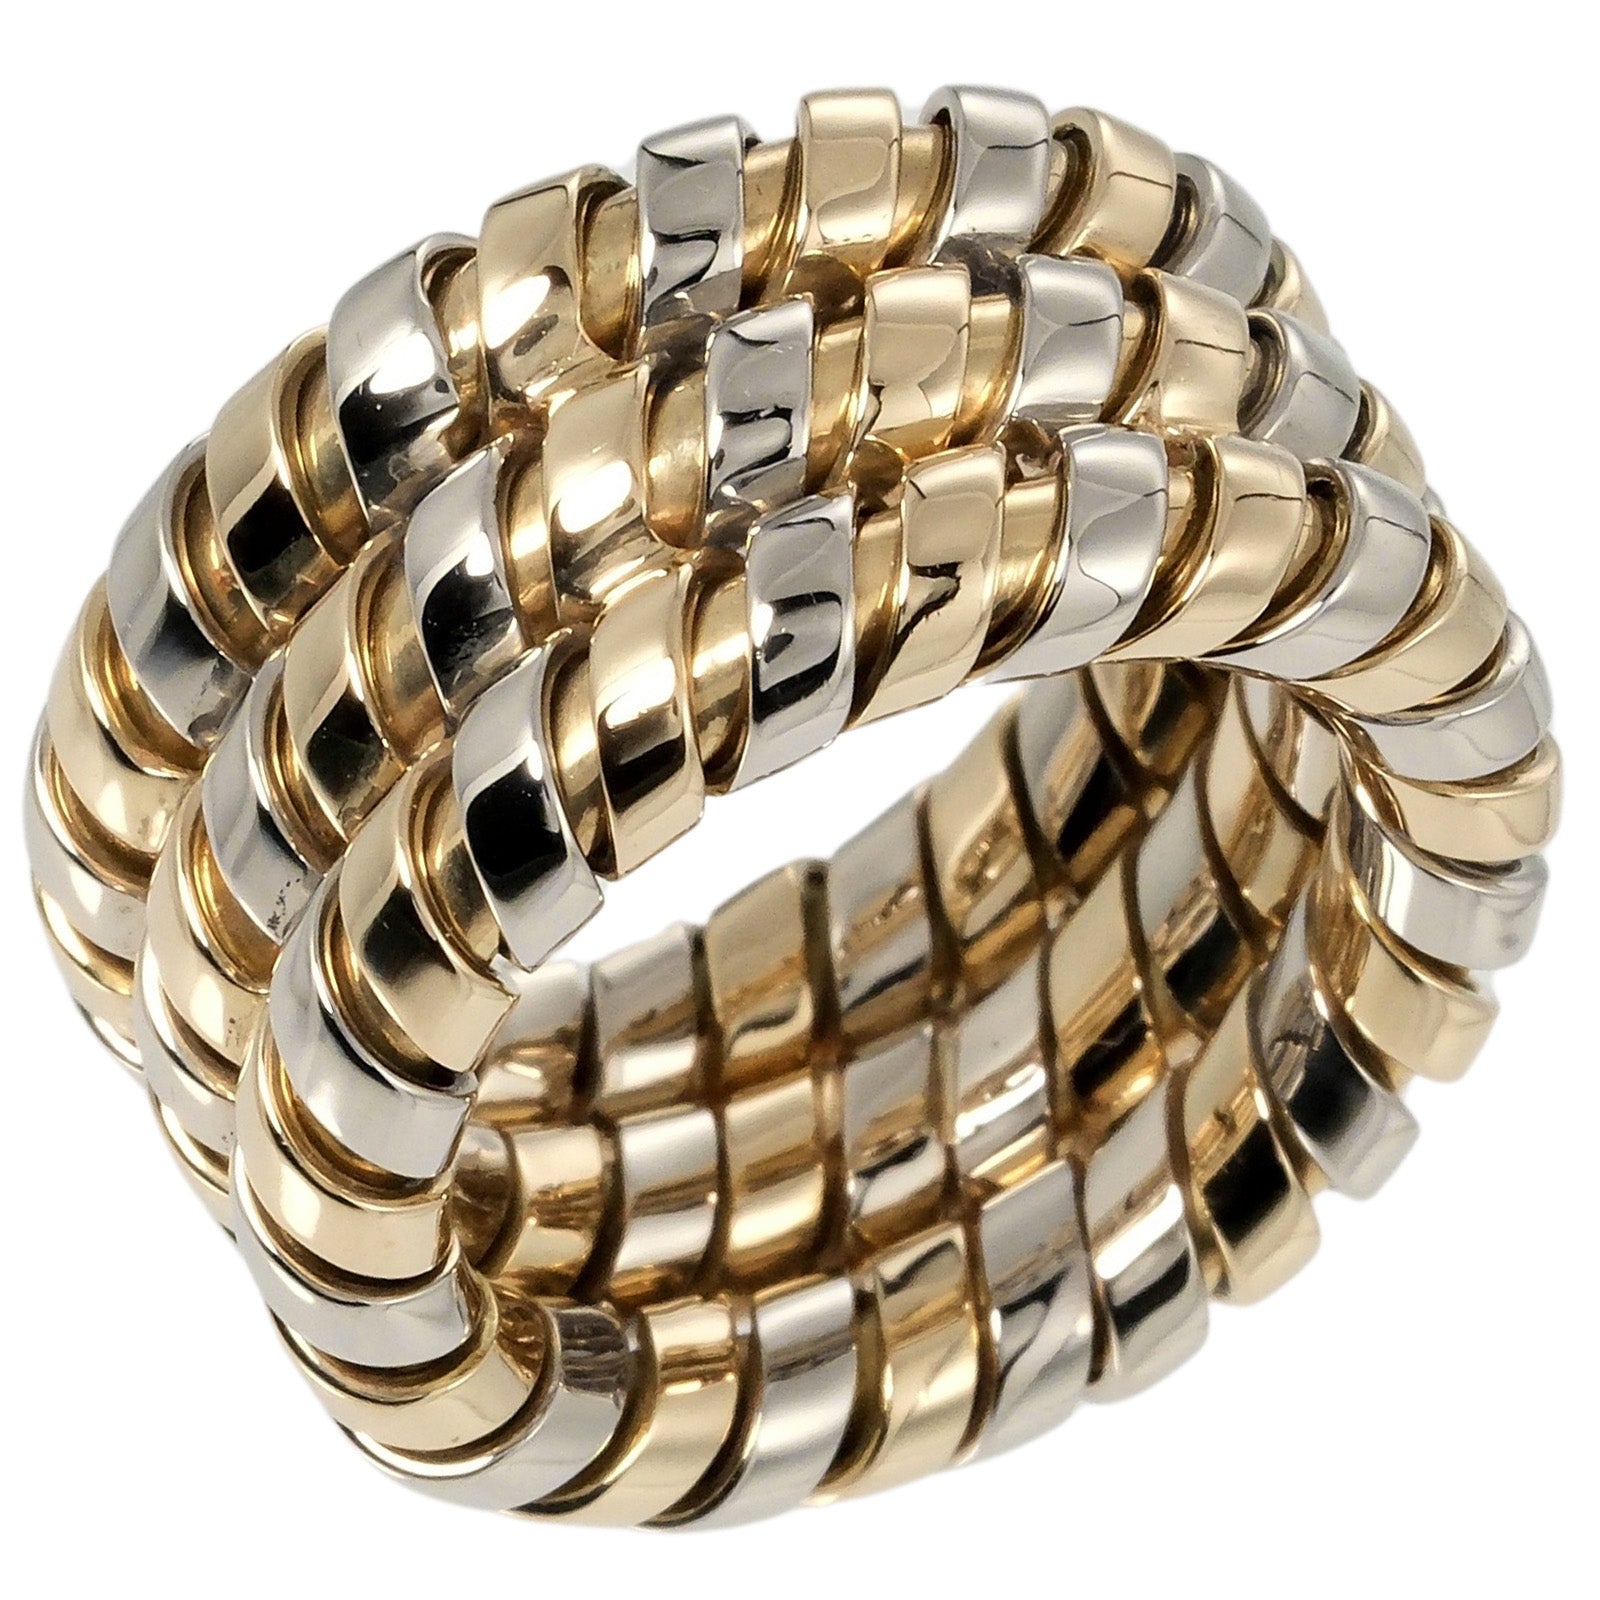 [LuxUness]  Bulgari BVLGARI Tubogas Triple-band Ring, Size 9, K18 Yellow and White Gold, 14.53g - A+ Preloved Metal Ring in Excellent condition